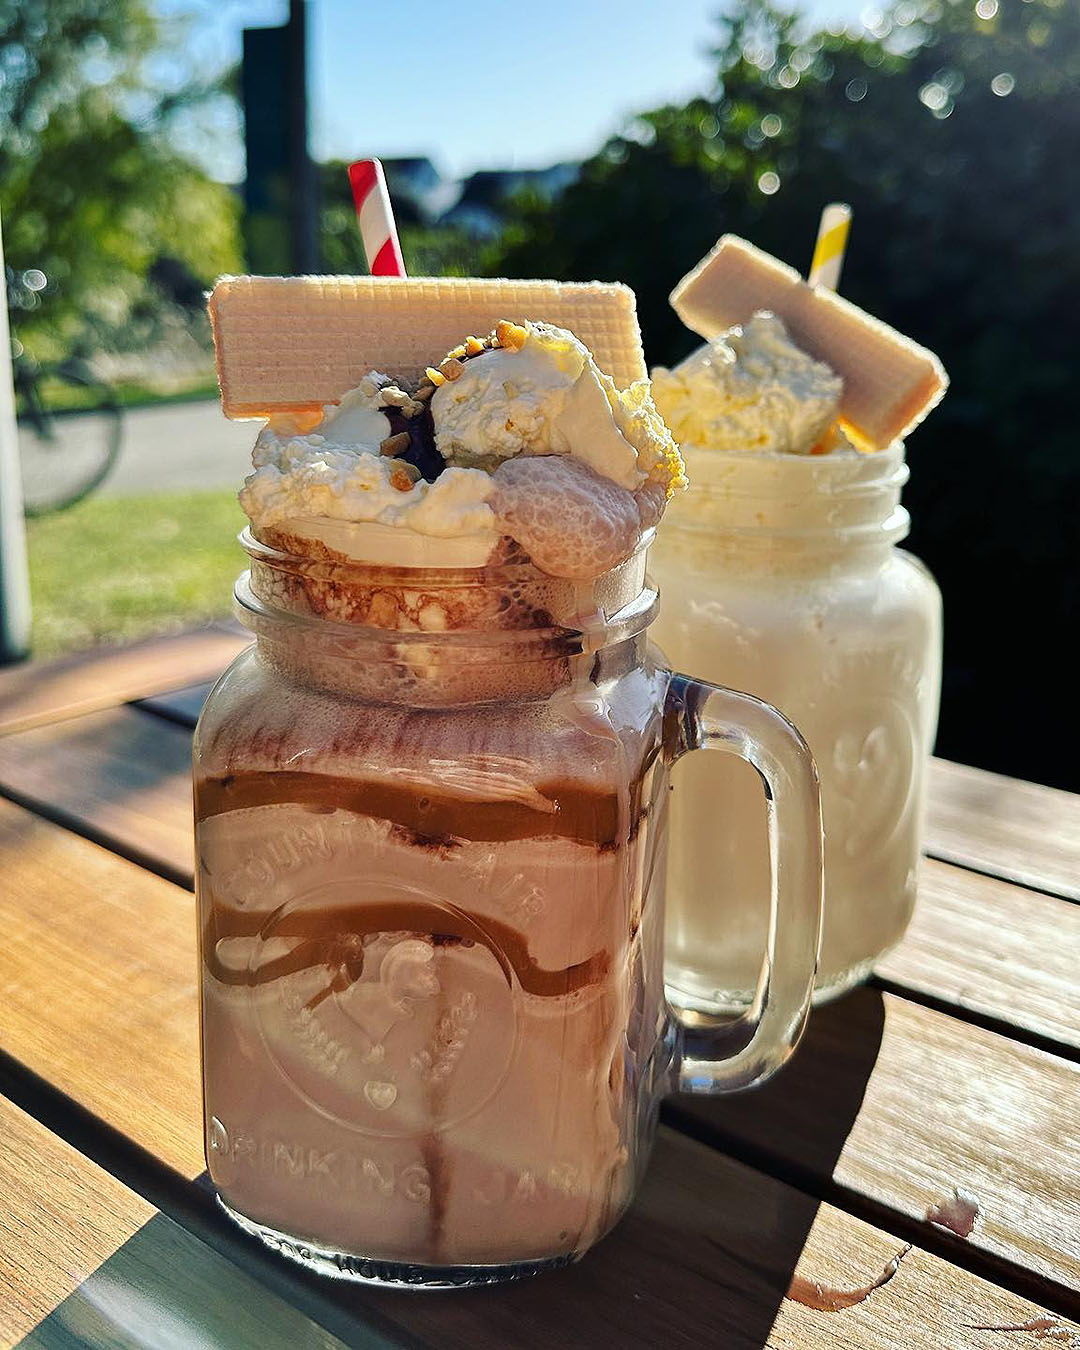 Delicious looking shakes at River Kitchen in Nelson.